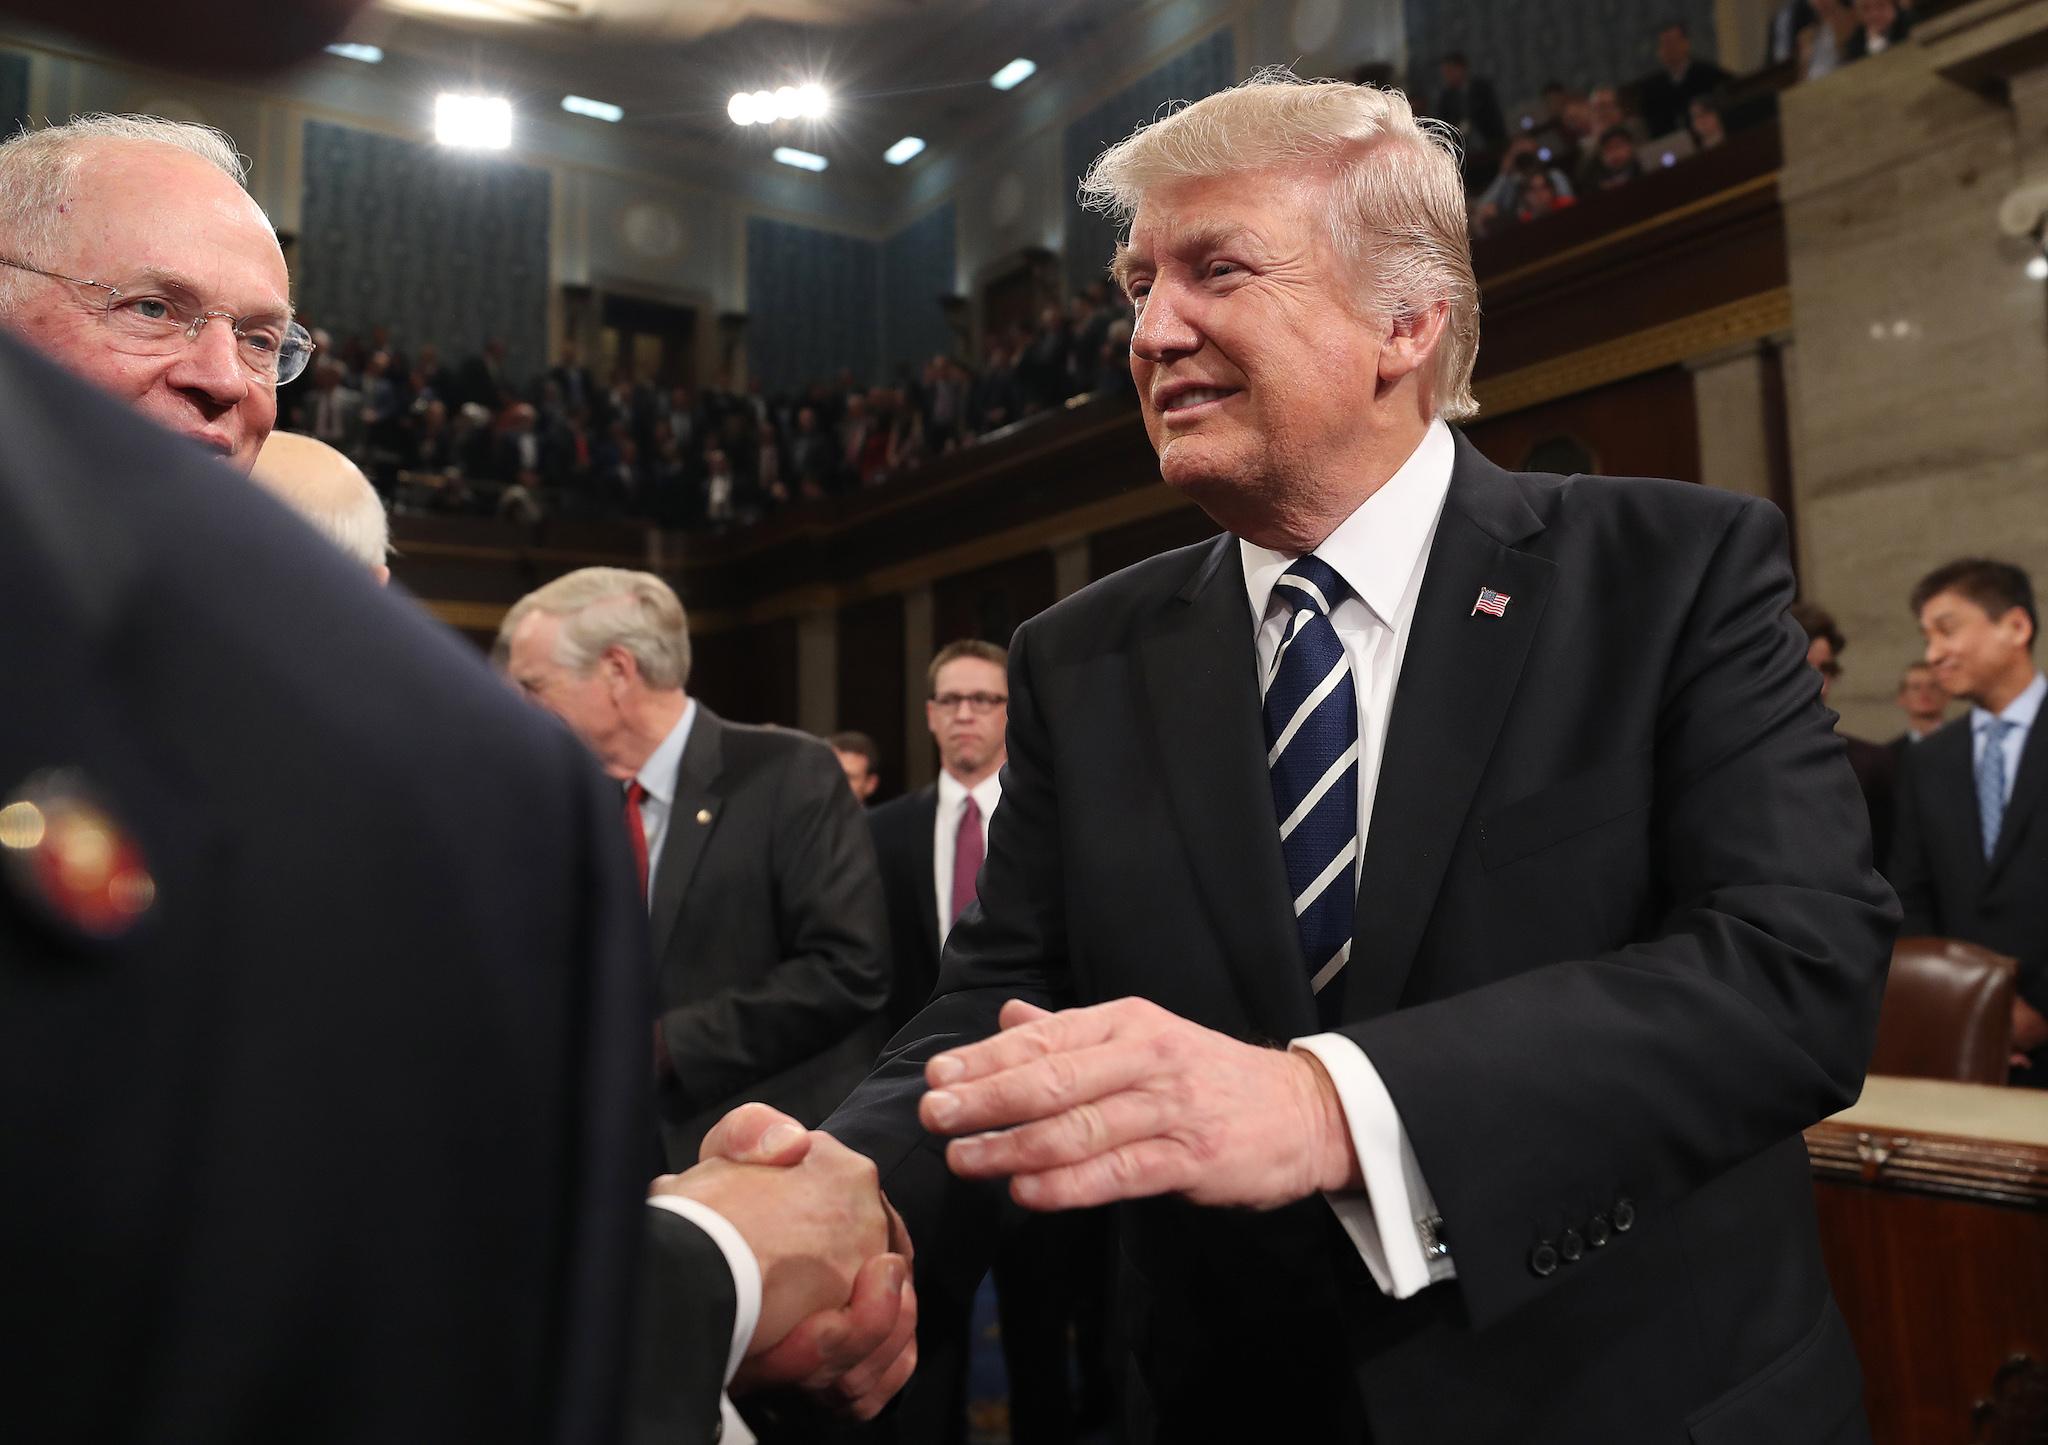 US President Donald Trump shakes hands after delivering his first address to a joint session of Congress from the floor of the House of Representatives in Washington